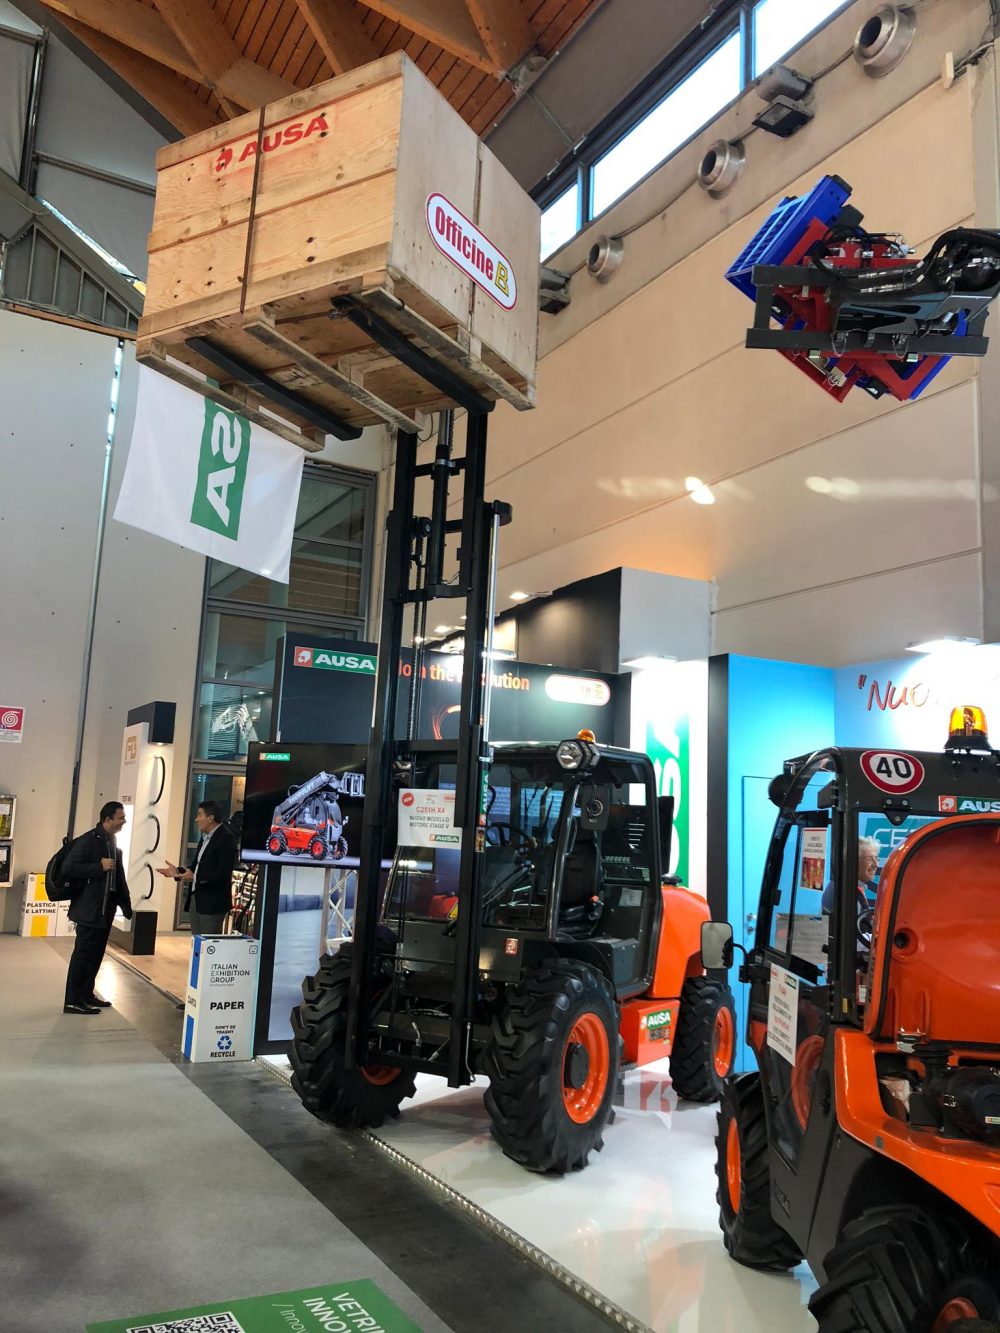 AUSA C251H forklift receives Technological Innovation recognition at Ecomondo Italy